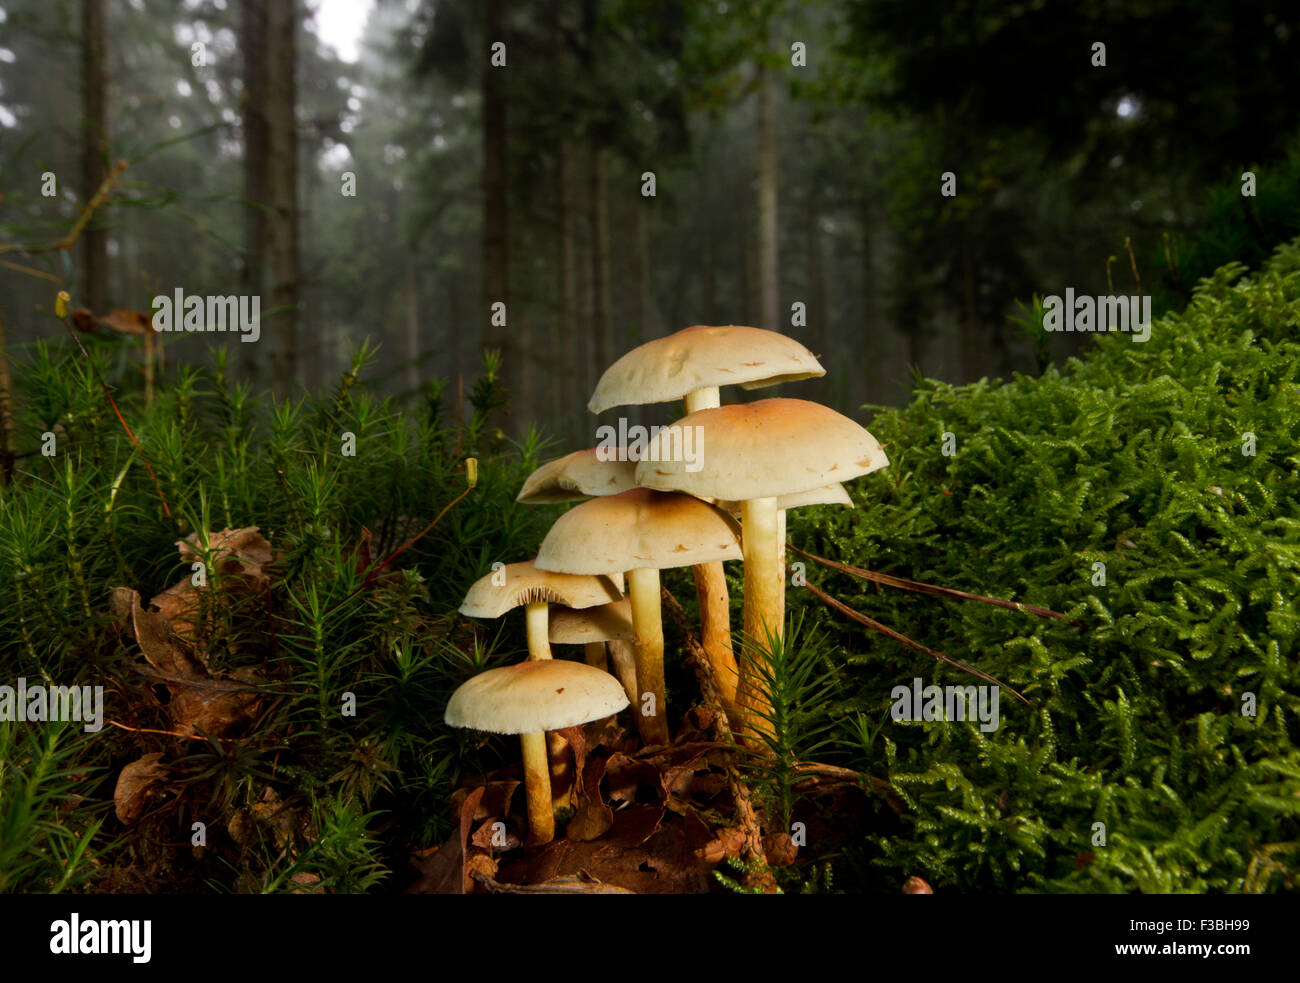 Sulphur tuft (Hypholoma fasciculare), poisonous mushrooms in a forest, between Hypnum moss and Common Haircap moss Stock Photo